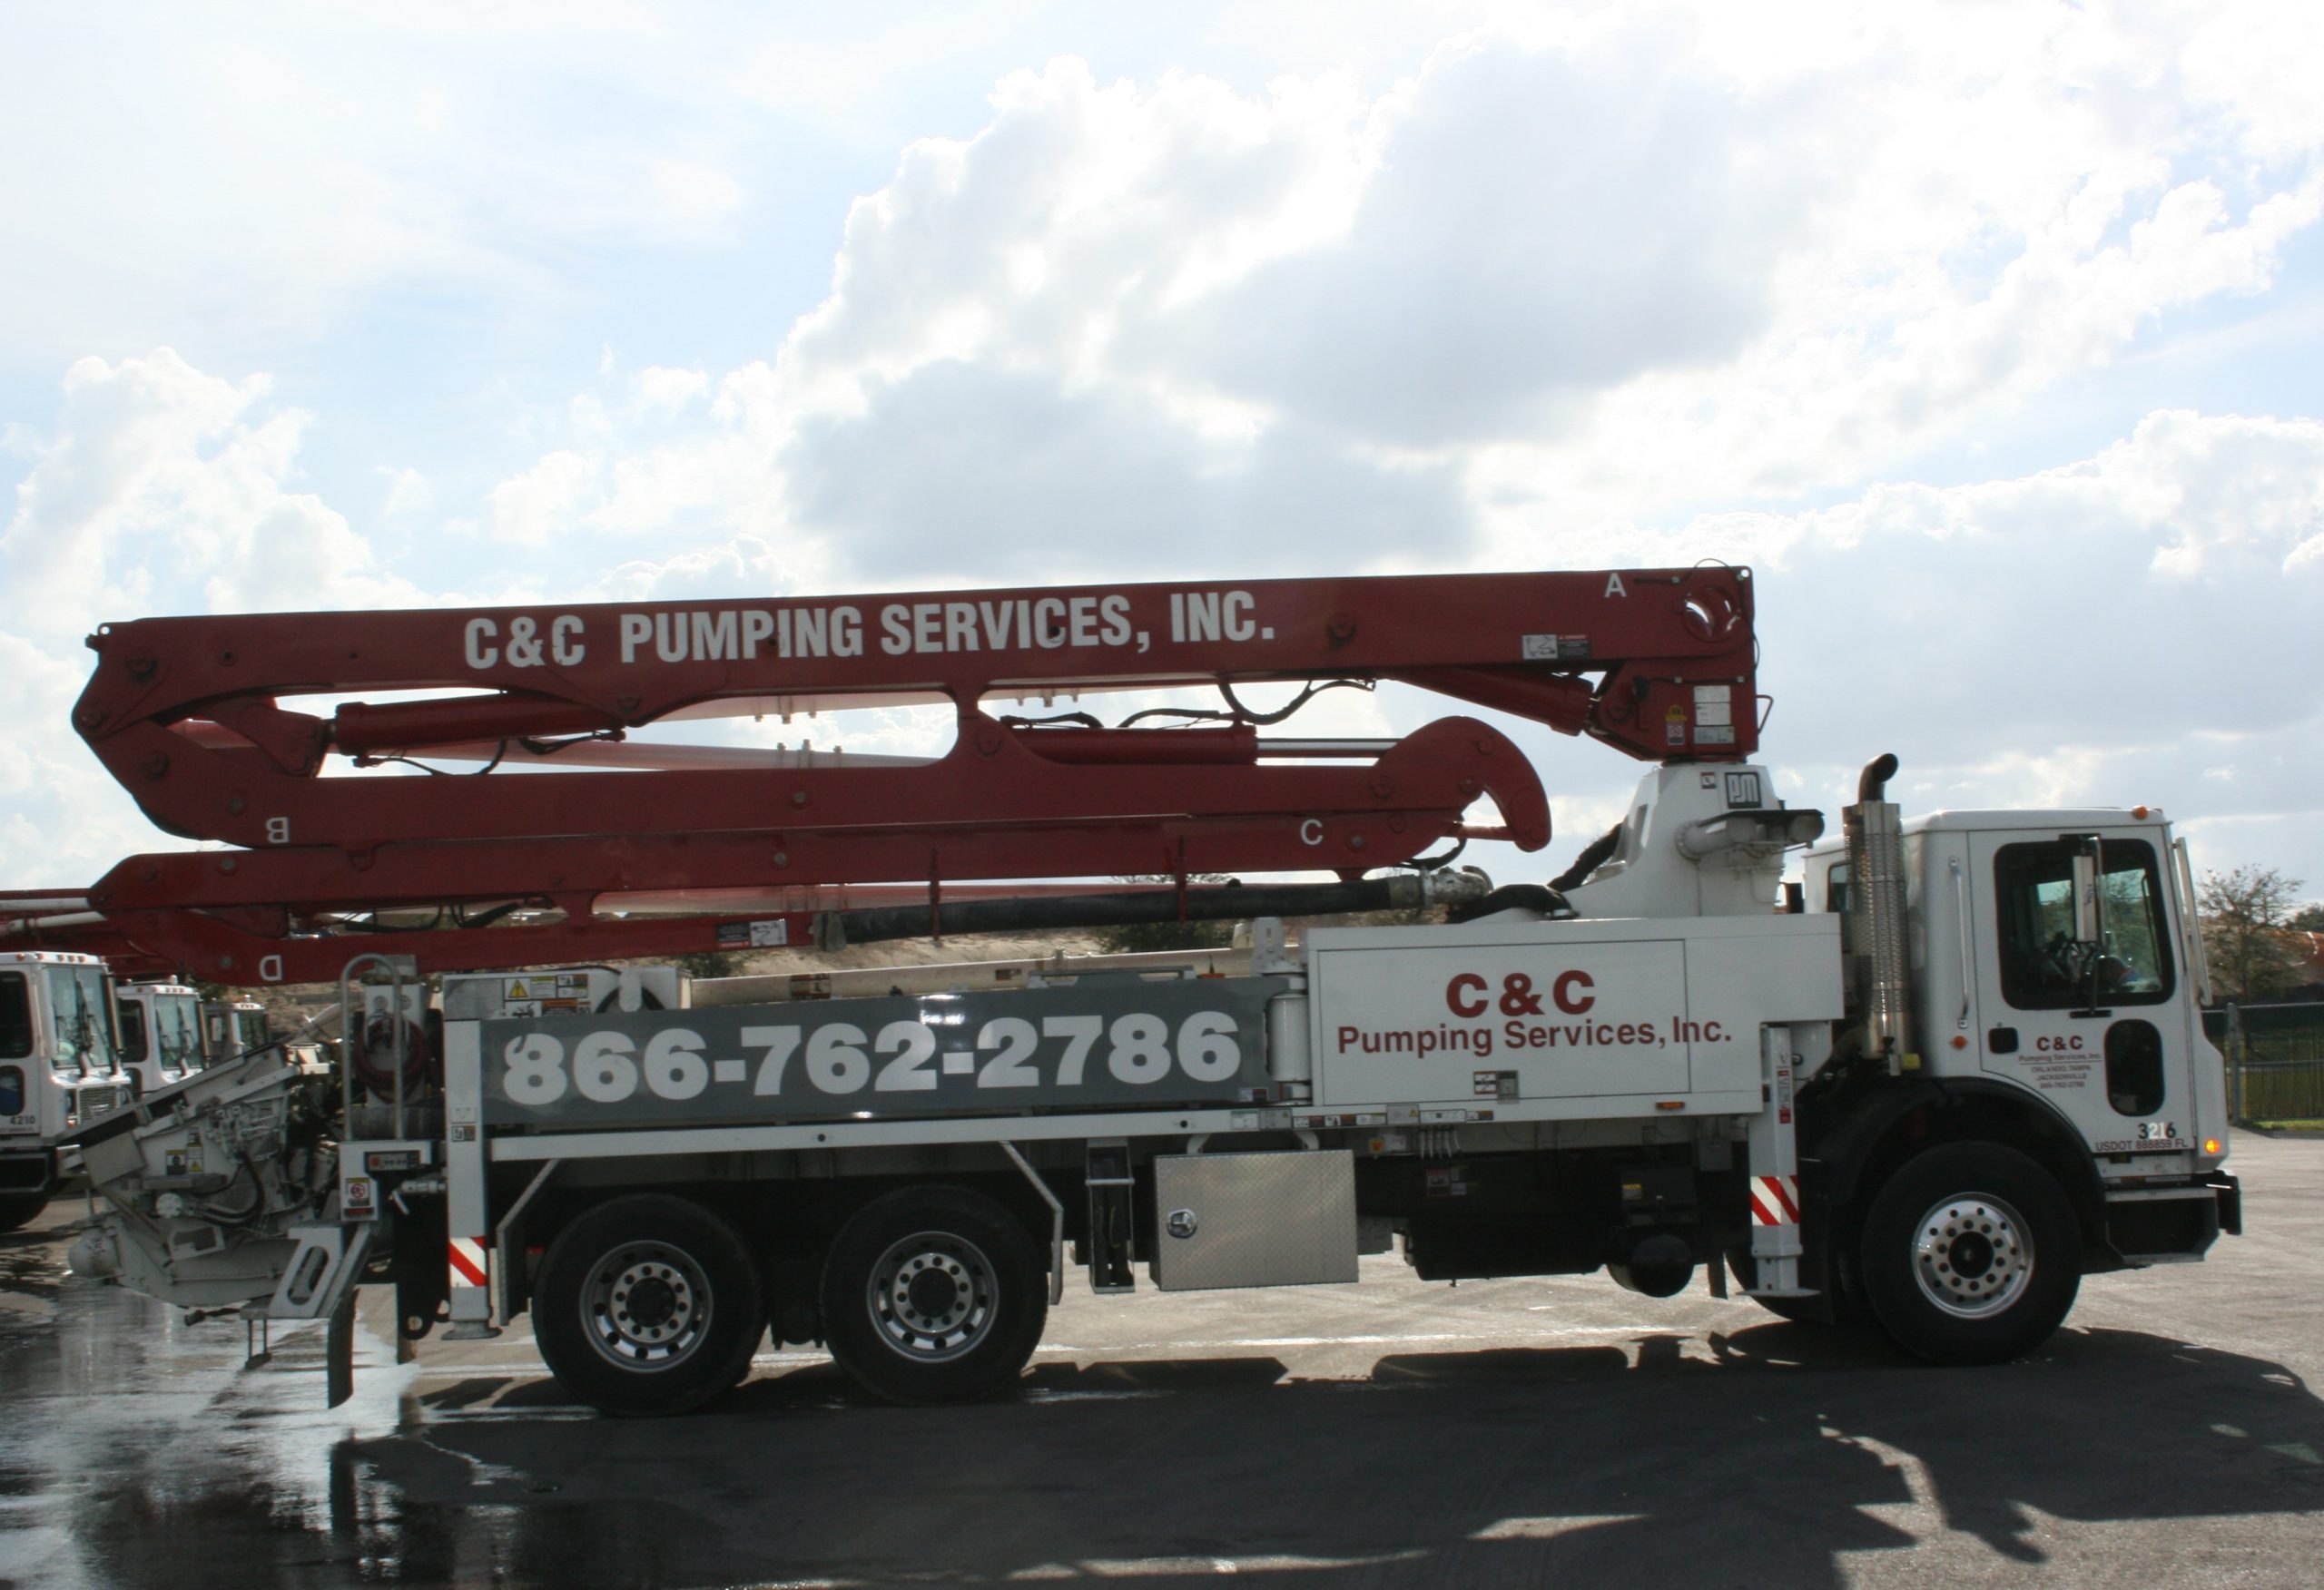 32 Meter concrete boom pump, provided by C&C Pumping Services Inc. 